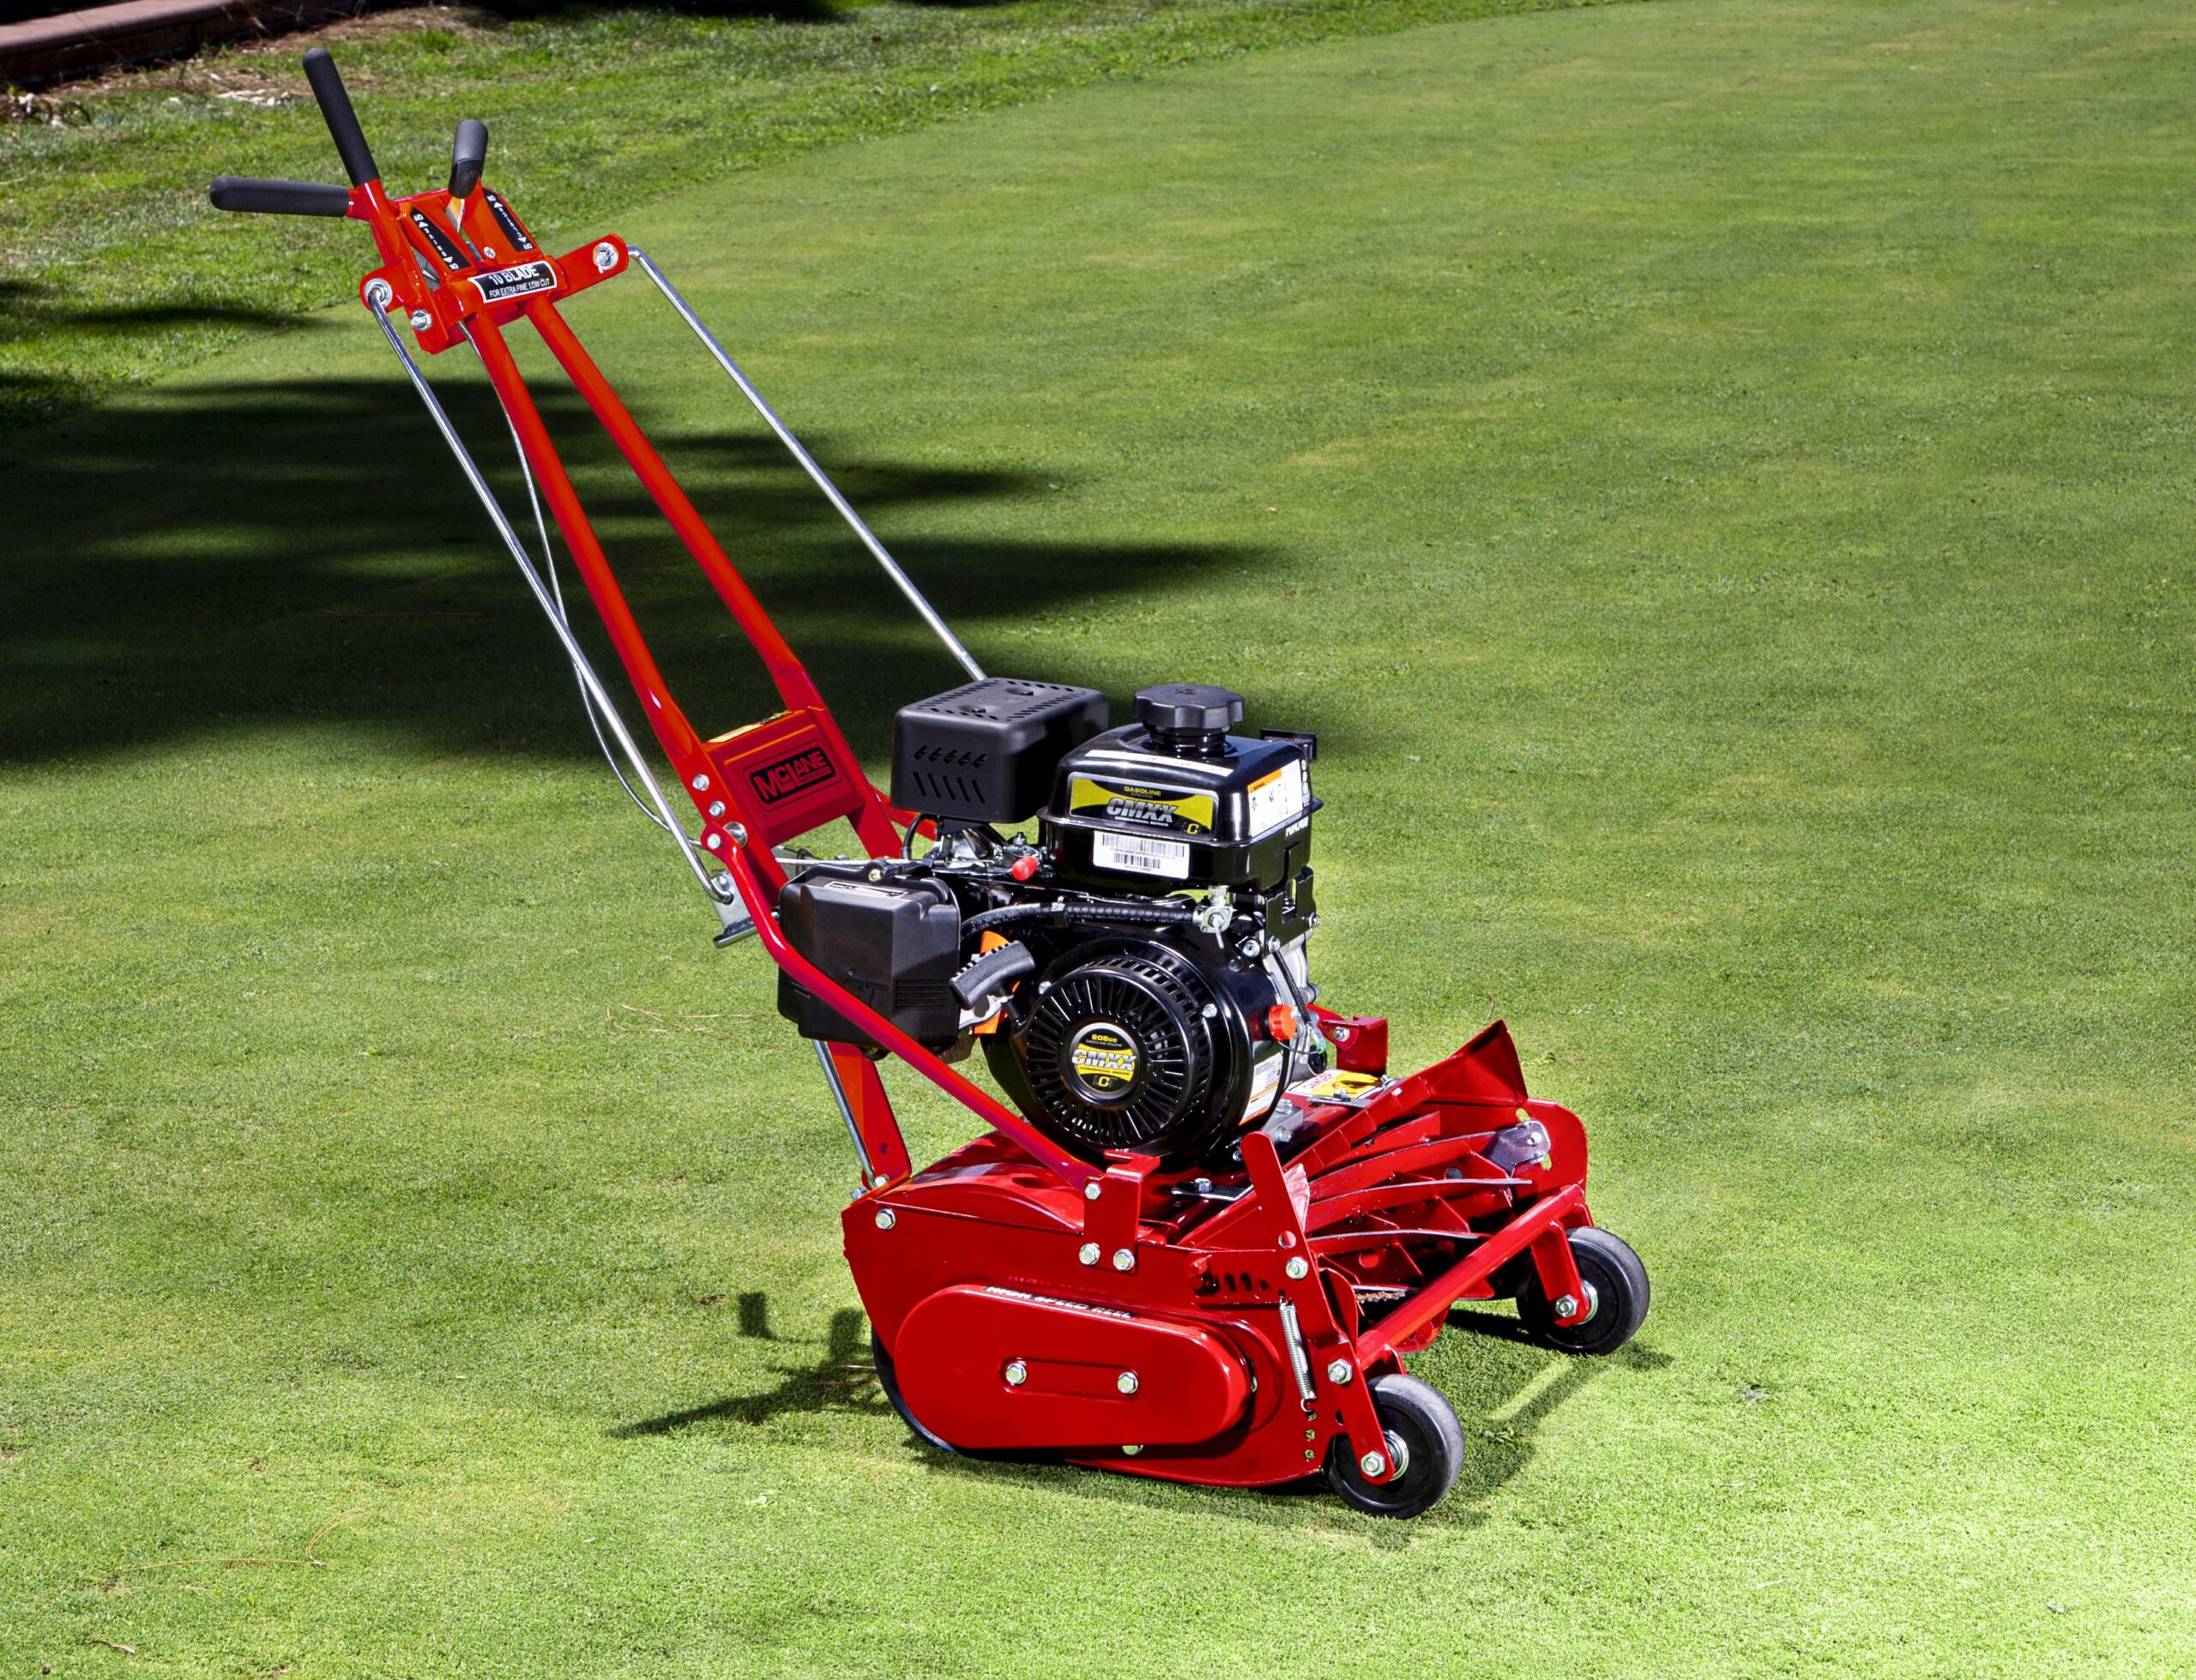 20″ Reel Mower Red Version (SPRING SPECIAL, LOWEST PRICE EVER!) – McLane  made in USA since 1946